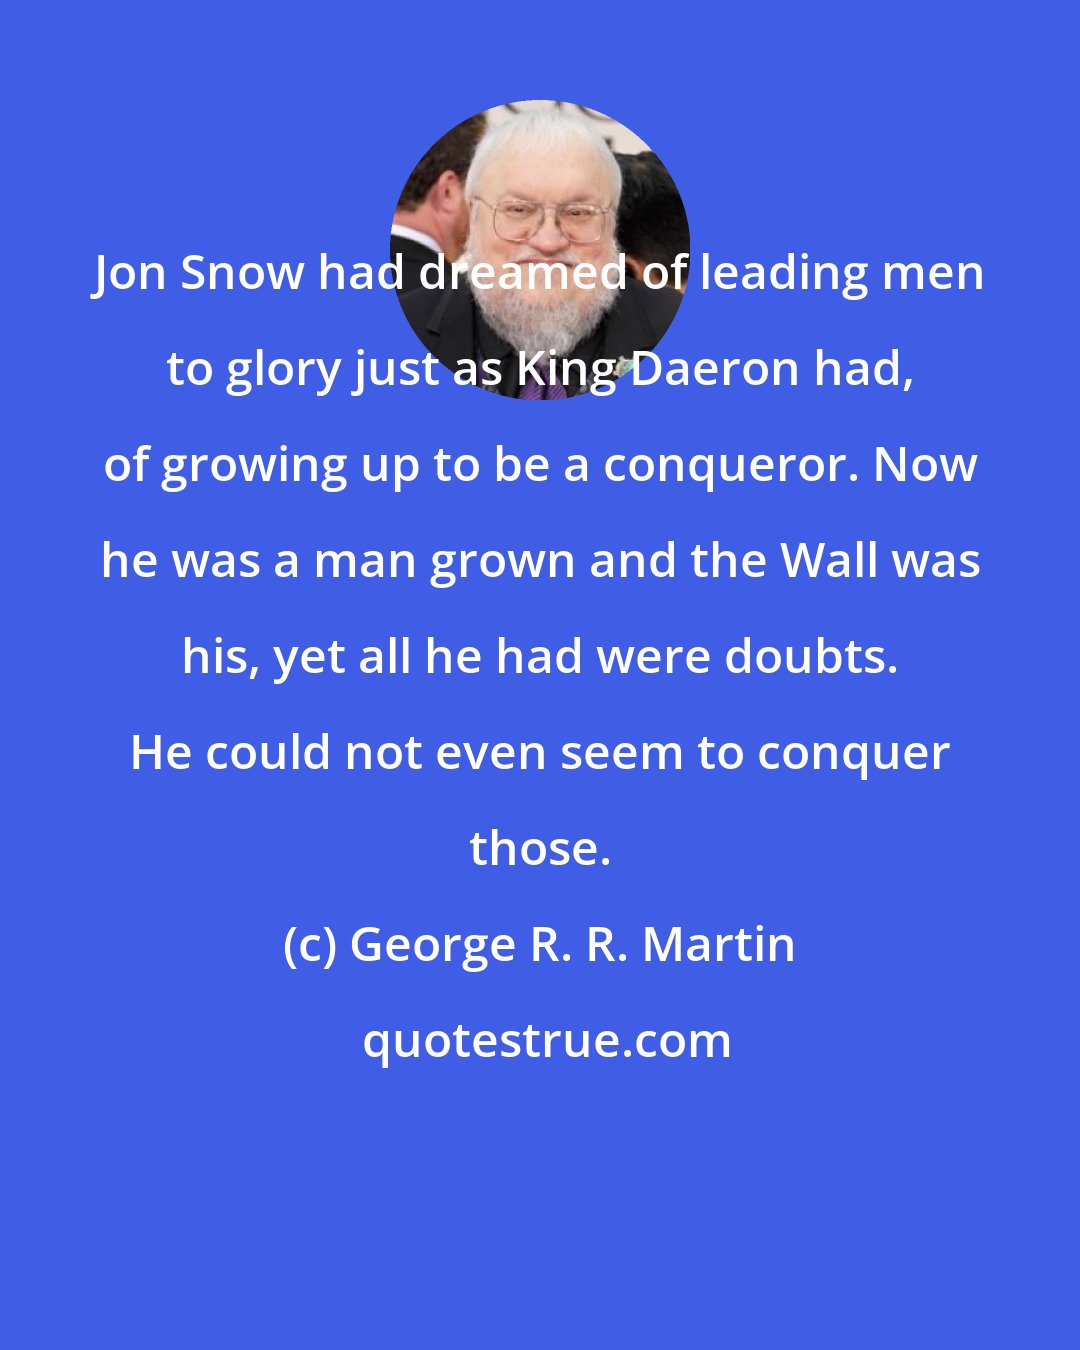 George R. R. Martin: Jon Snow had dreamed of leading men to glory just as King Daeron had, of growing up to be a conqueror. Now he was a man grown and the Wall was his, yet all he had were doubts. He could not even seem to conquer those.